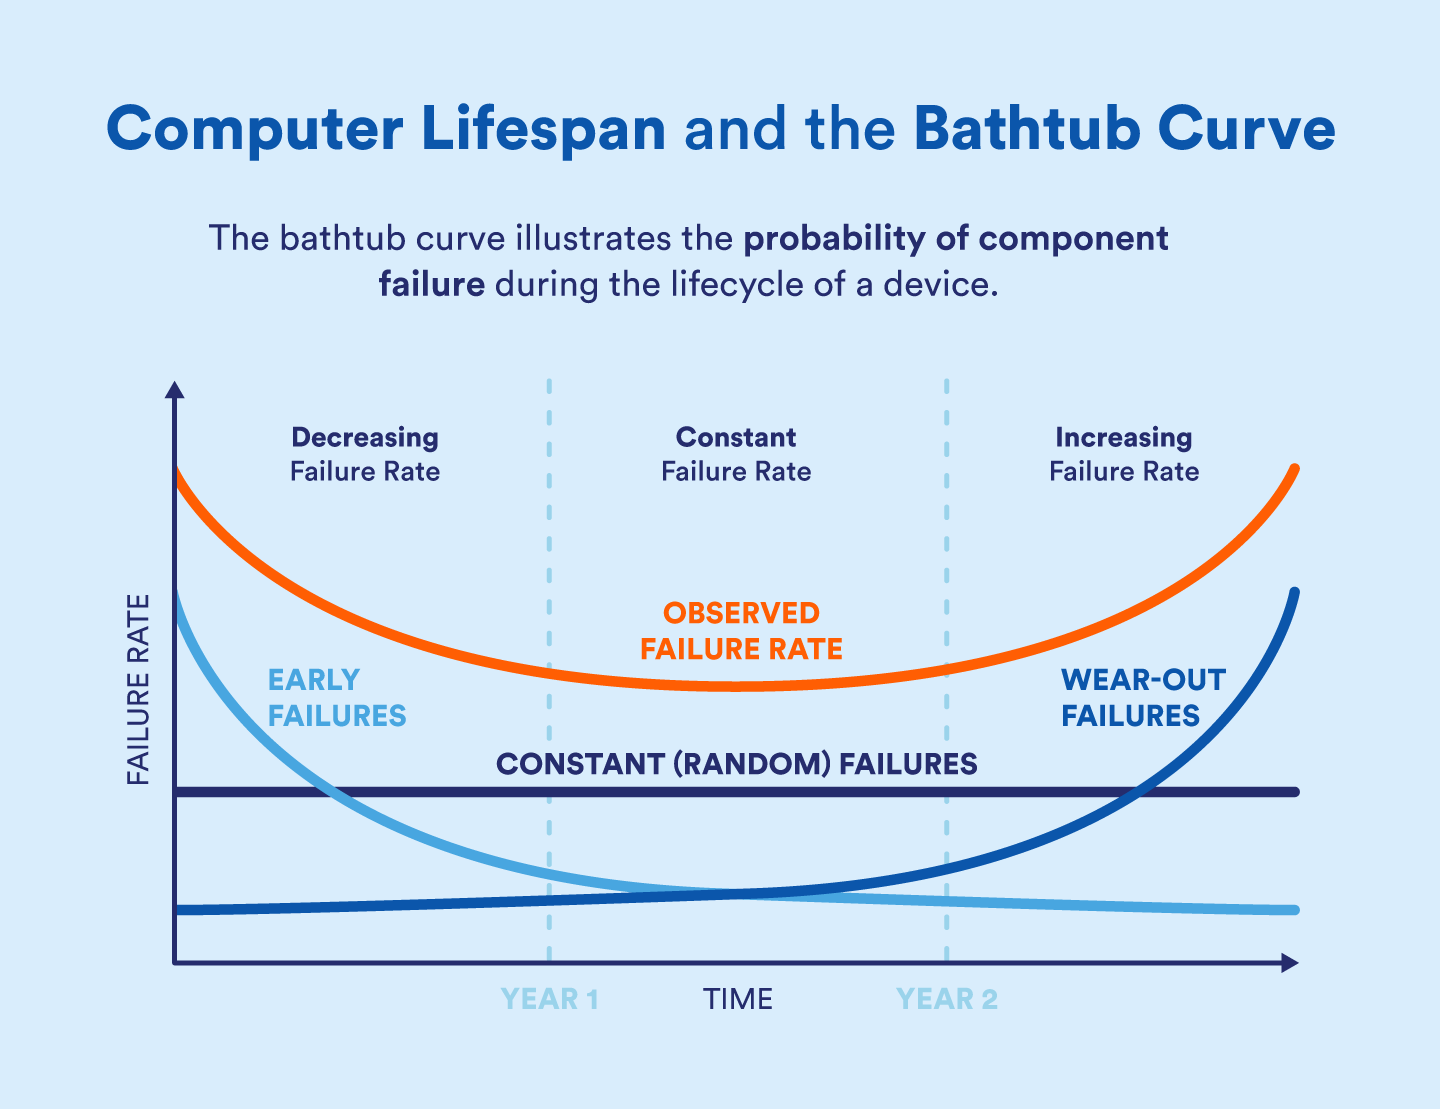 Bathtub curve showing computer lifecycle